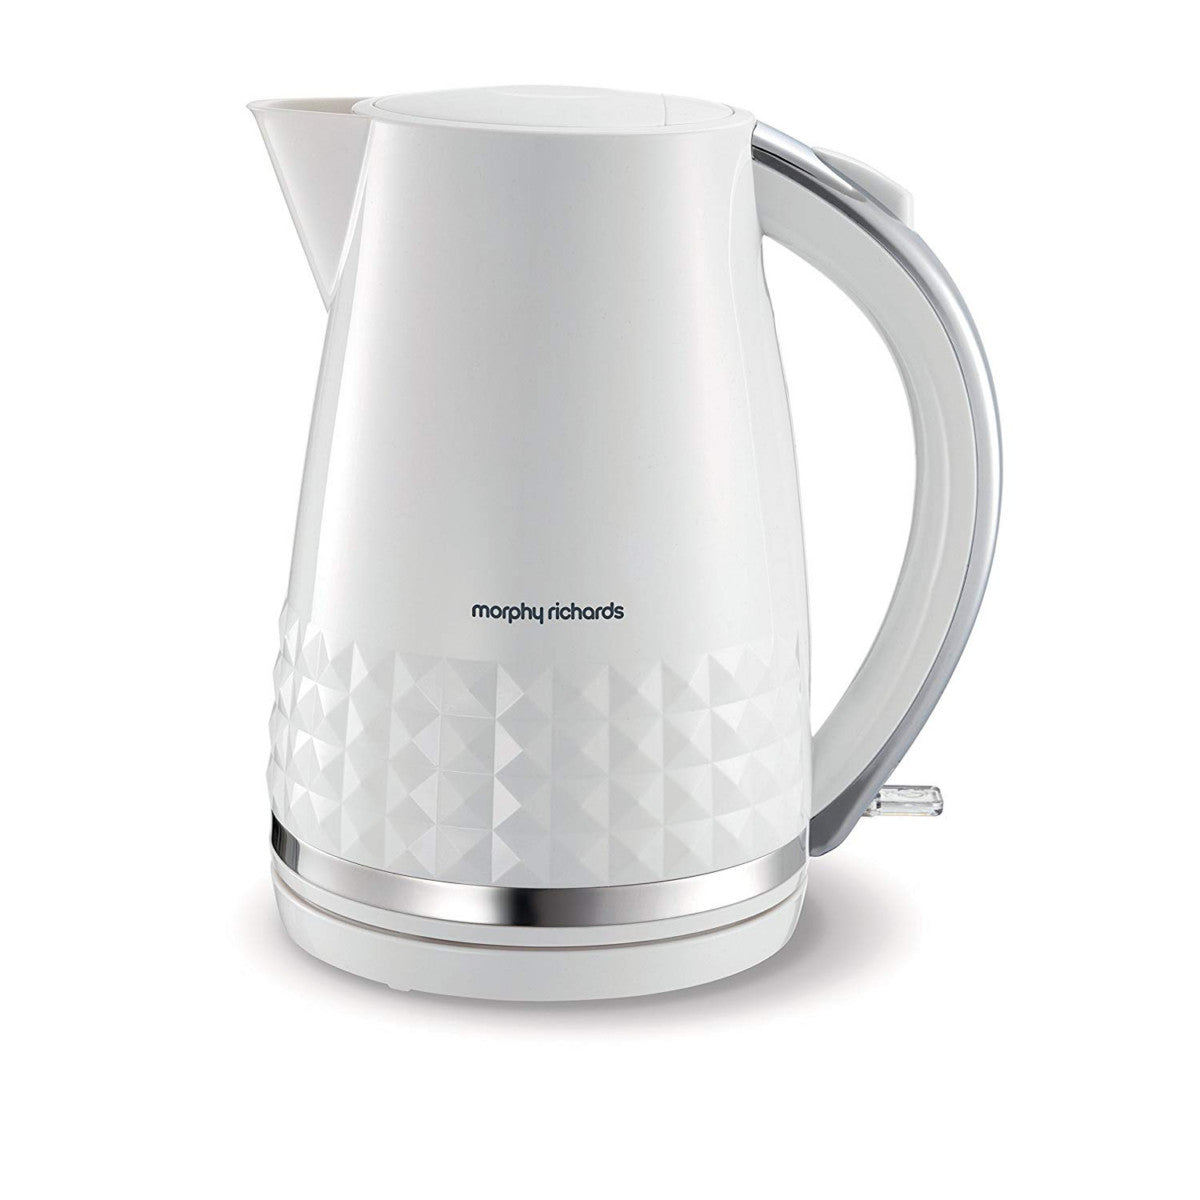 Morphy Richards Dimensions Jug Kettle 108263 White 3000W